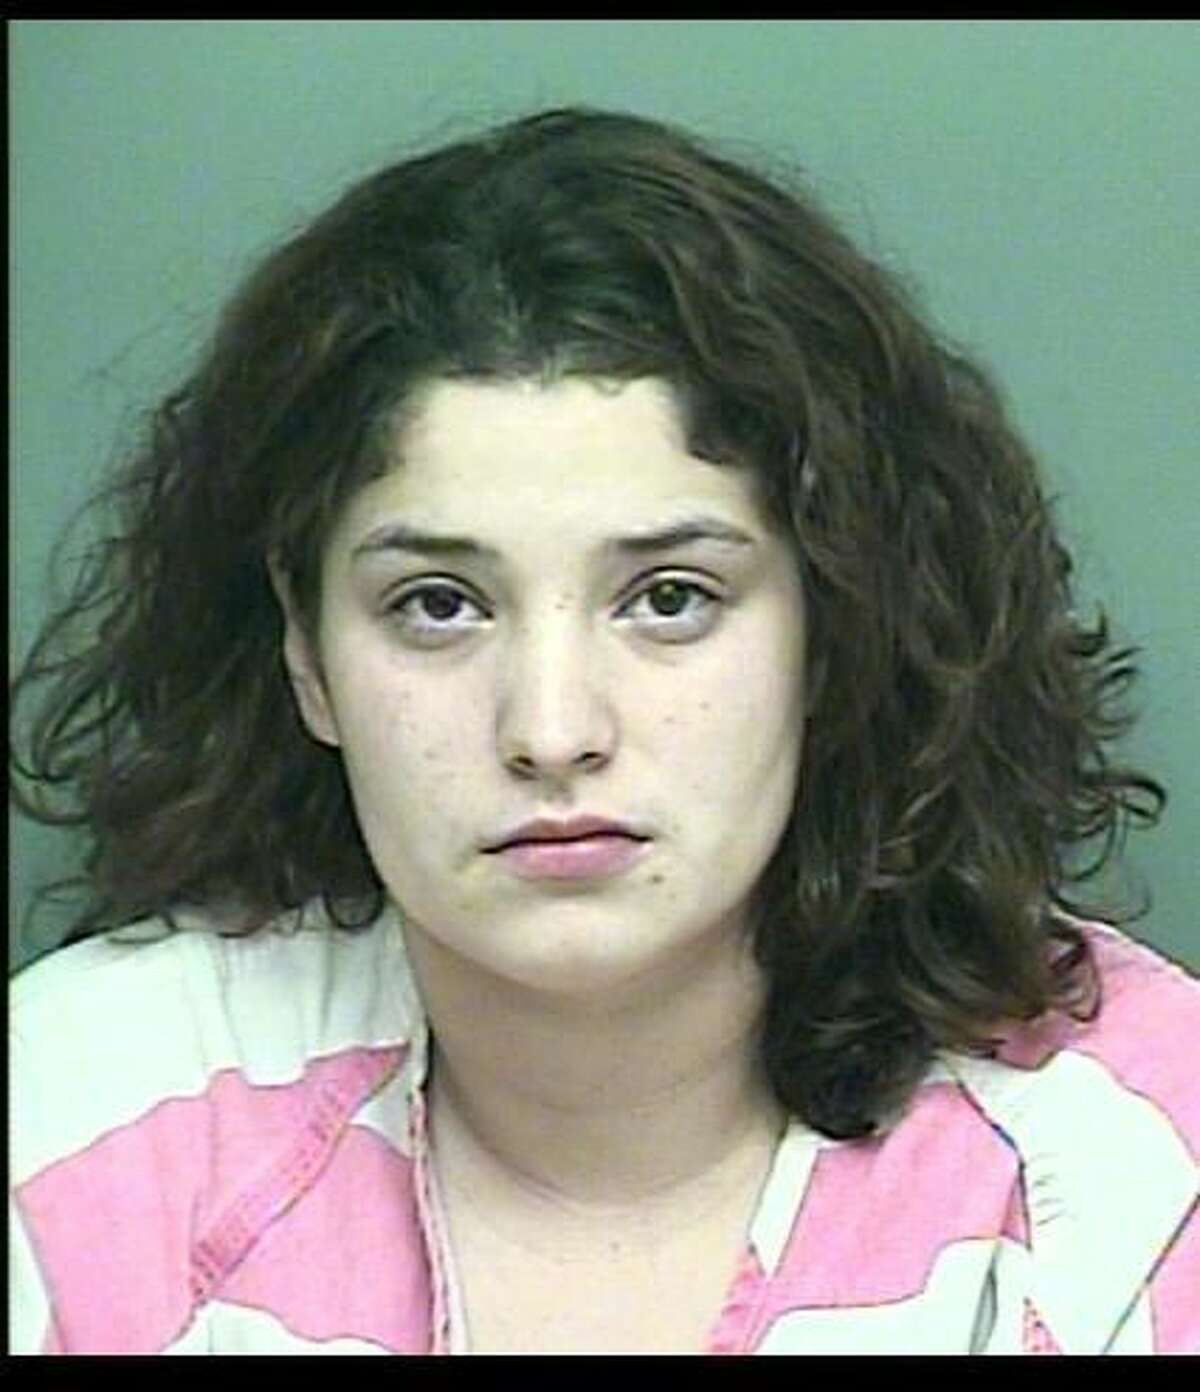 RICO, Maricela Linda-Maria /White/Female DOB: 1-29-92 /Height: 6-0 Weight: 200 /Hair: Brown Eyes: Brown /Warrant: #151112159 /Set aside bond agg assault with deadly weapon /LKA: Oak Grove Lane, New Caney